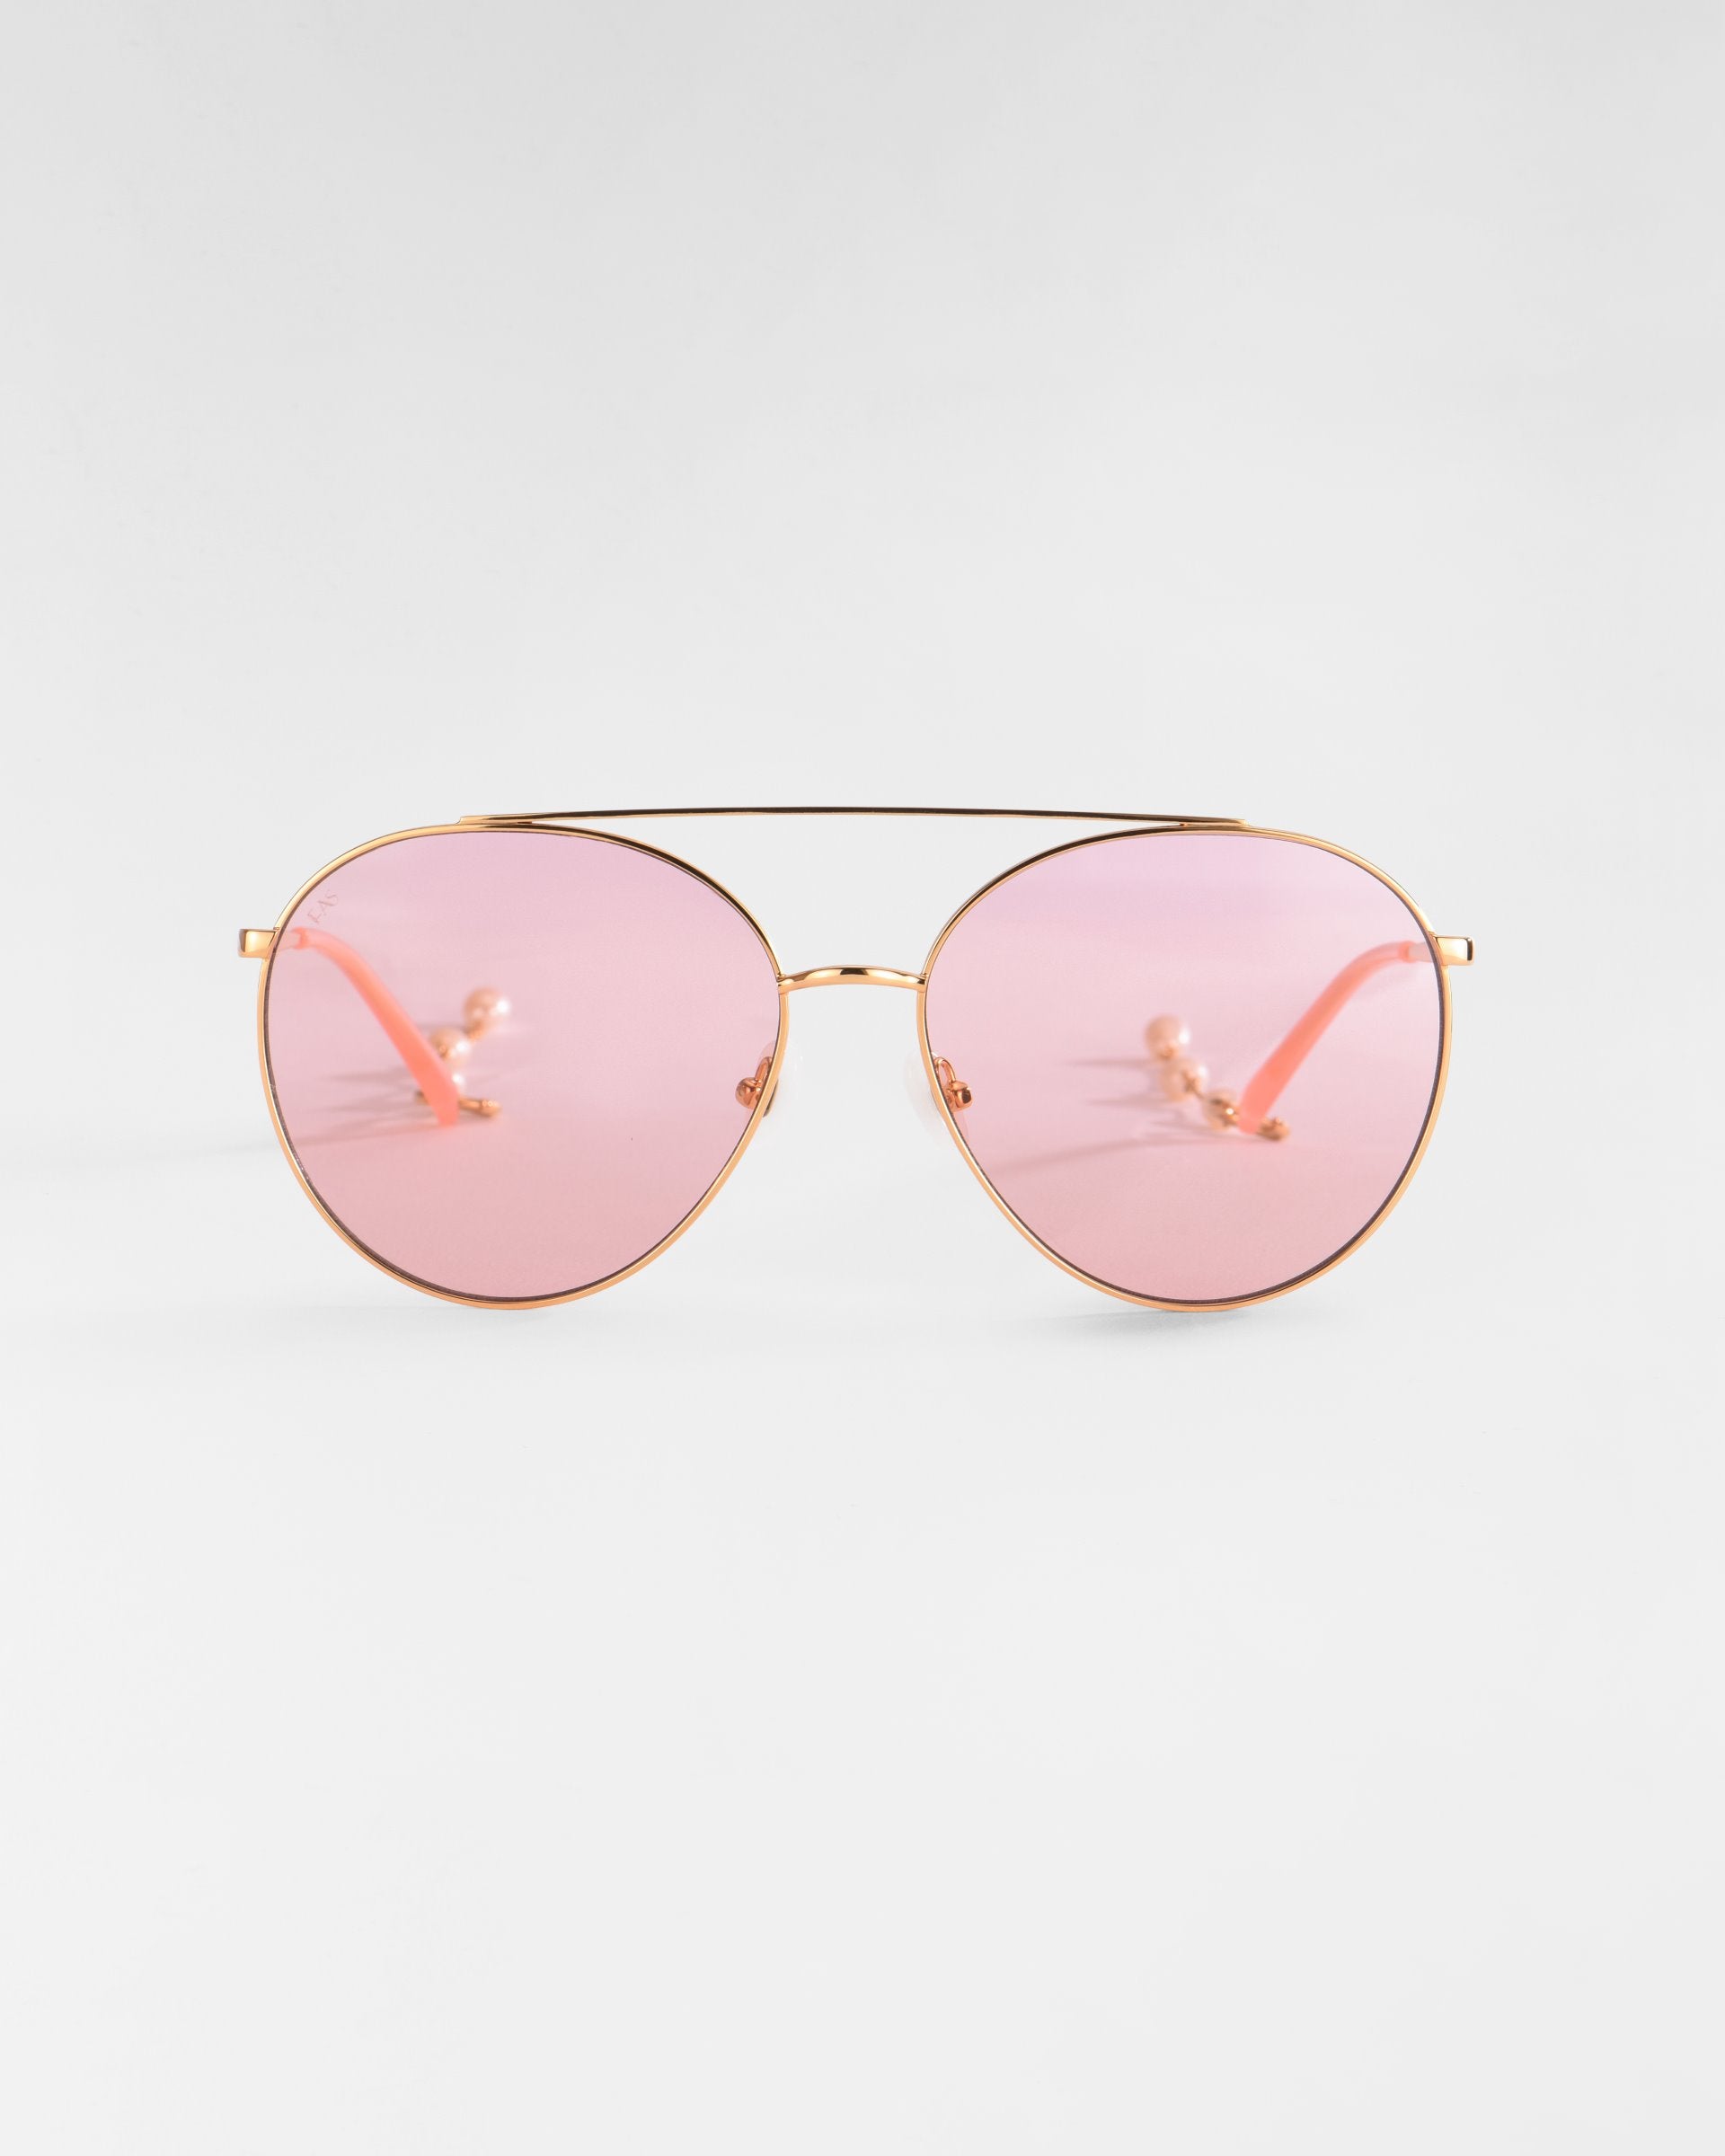 A pair of fashionable aviator sunglasses featuring 18k gold plating on the frame and light pink tinted lenses. The bridge and nose pads are also gold, with the stems extending to slender, light pink ear pieces. The background is a plain, neutral gray. This is the Yoyo by For Art's Sake®.